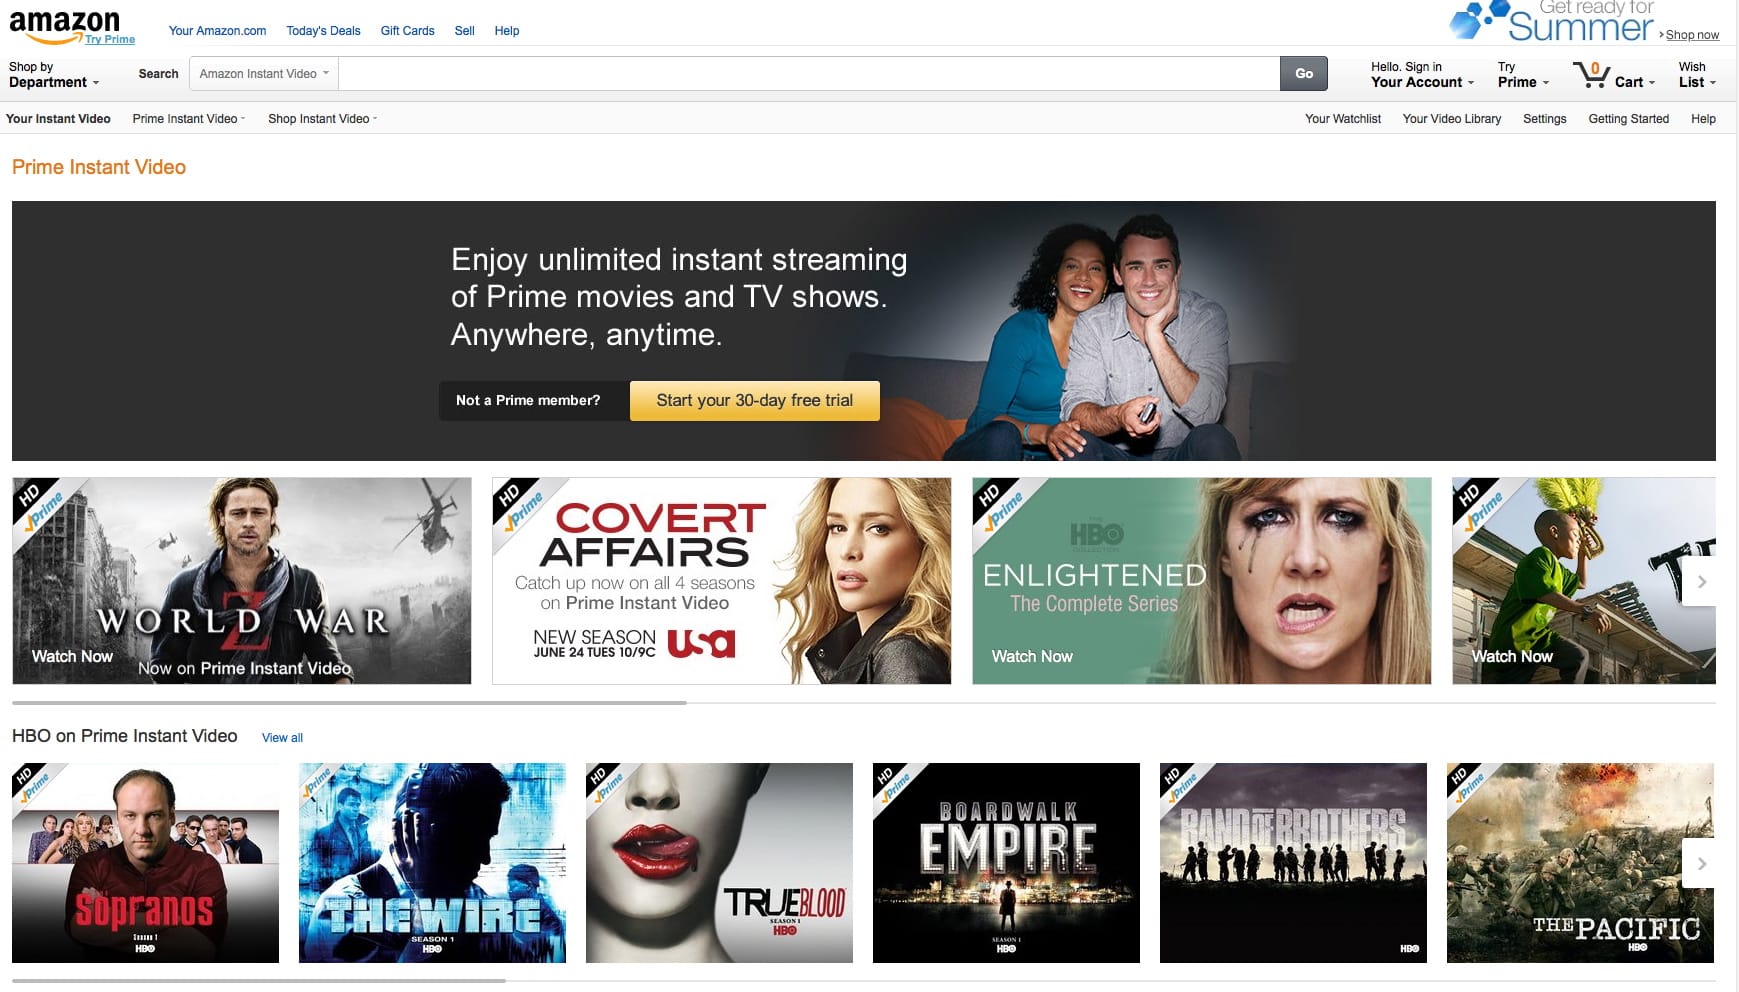 Amazon.com
Amazon changed the dynamics in 2011 when it started offering movies and TV shows to Prime members for free. Unlike Netflix, Amazon offers only part of its collection for free.